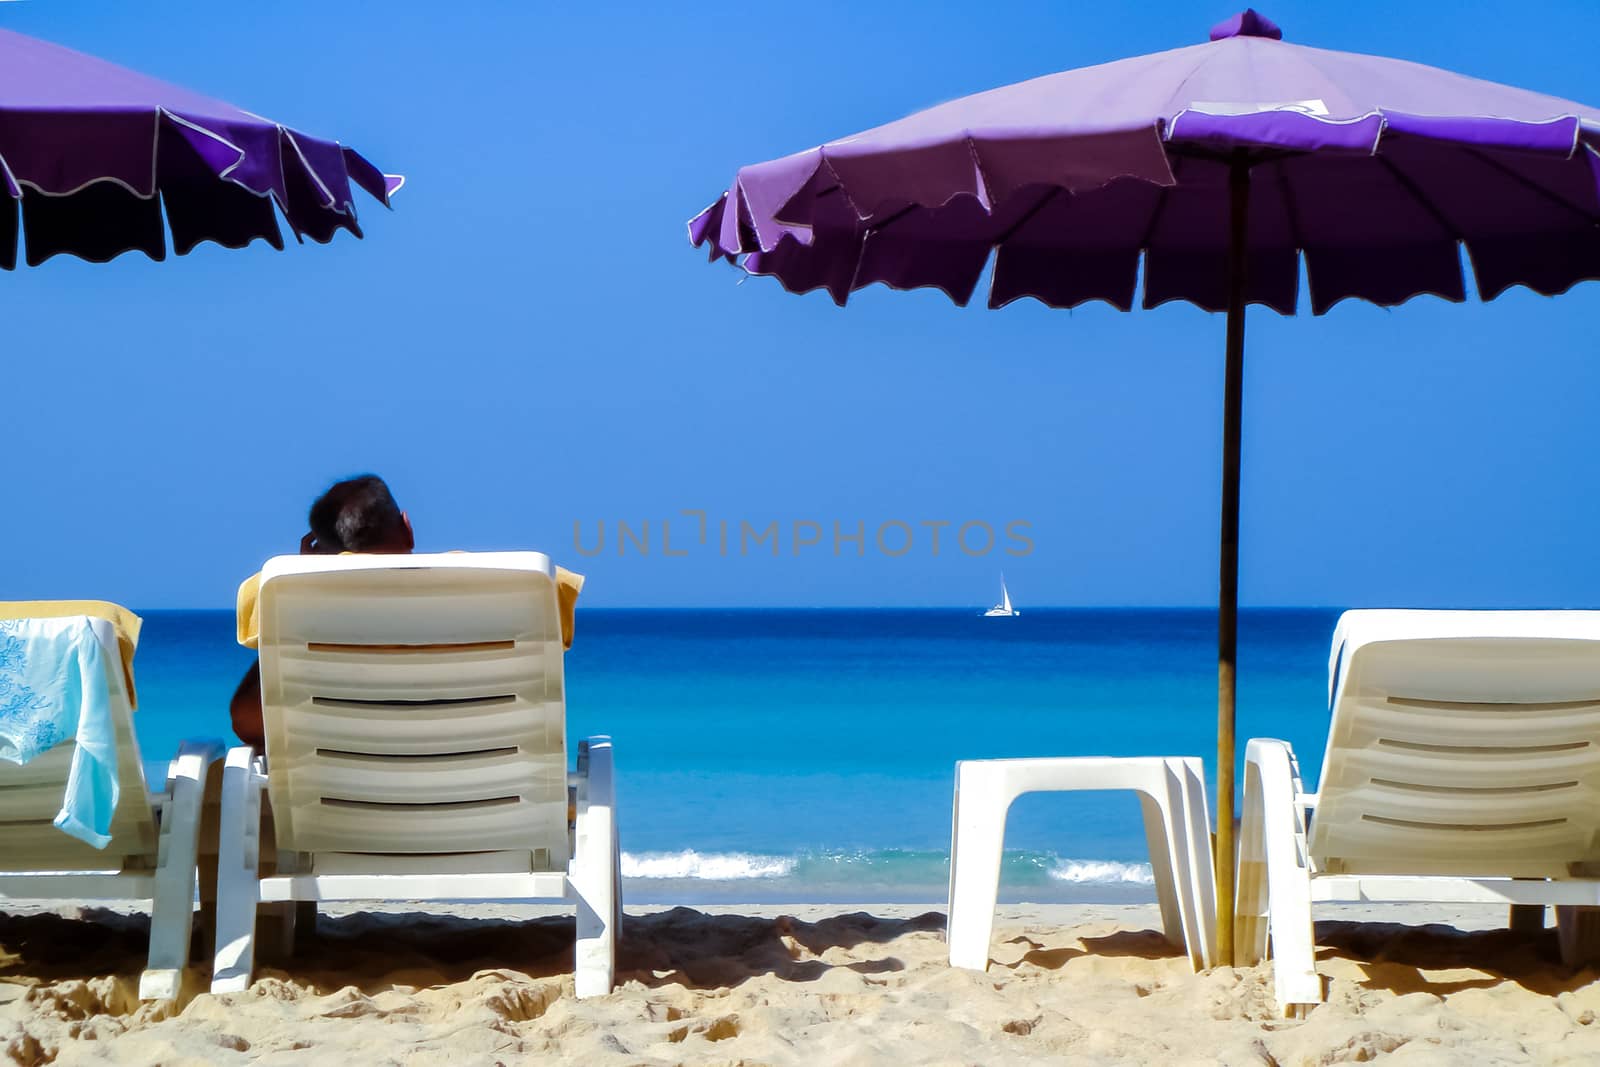 Vacation in tropical countries. Beach chairs and umbrellas on the beach with sea view.